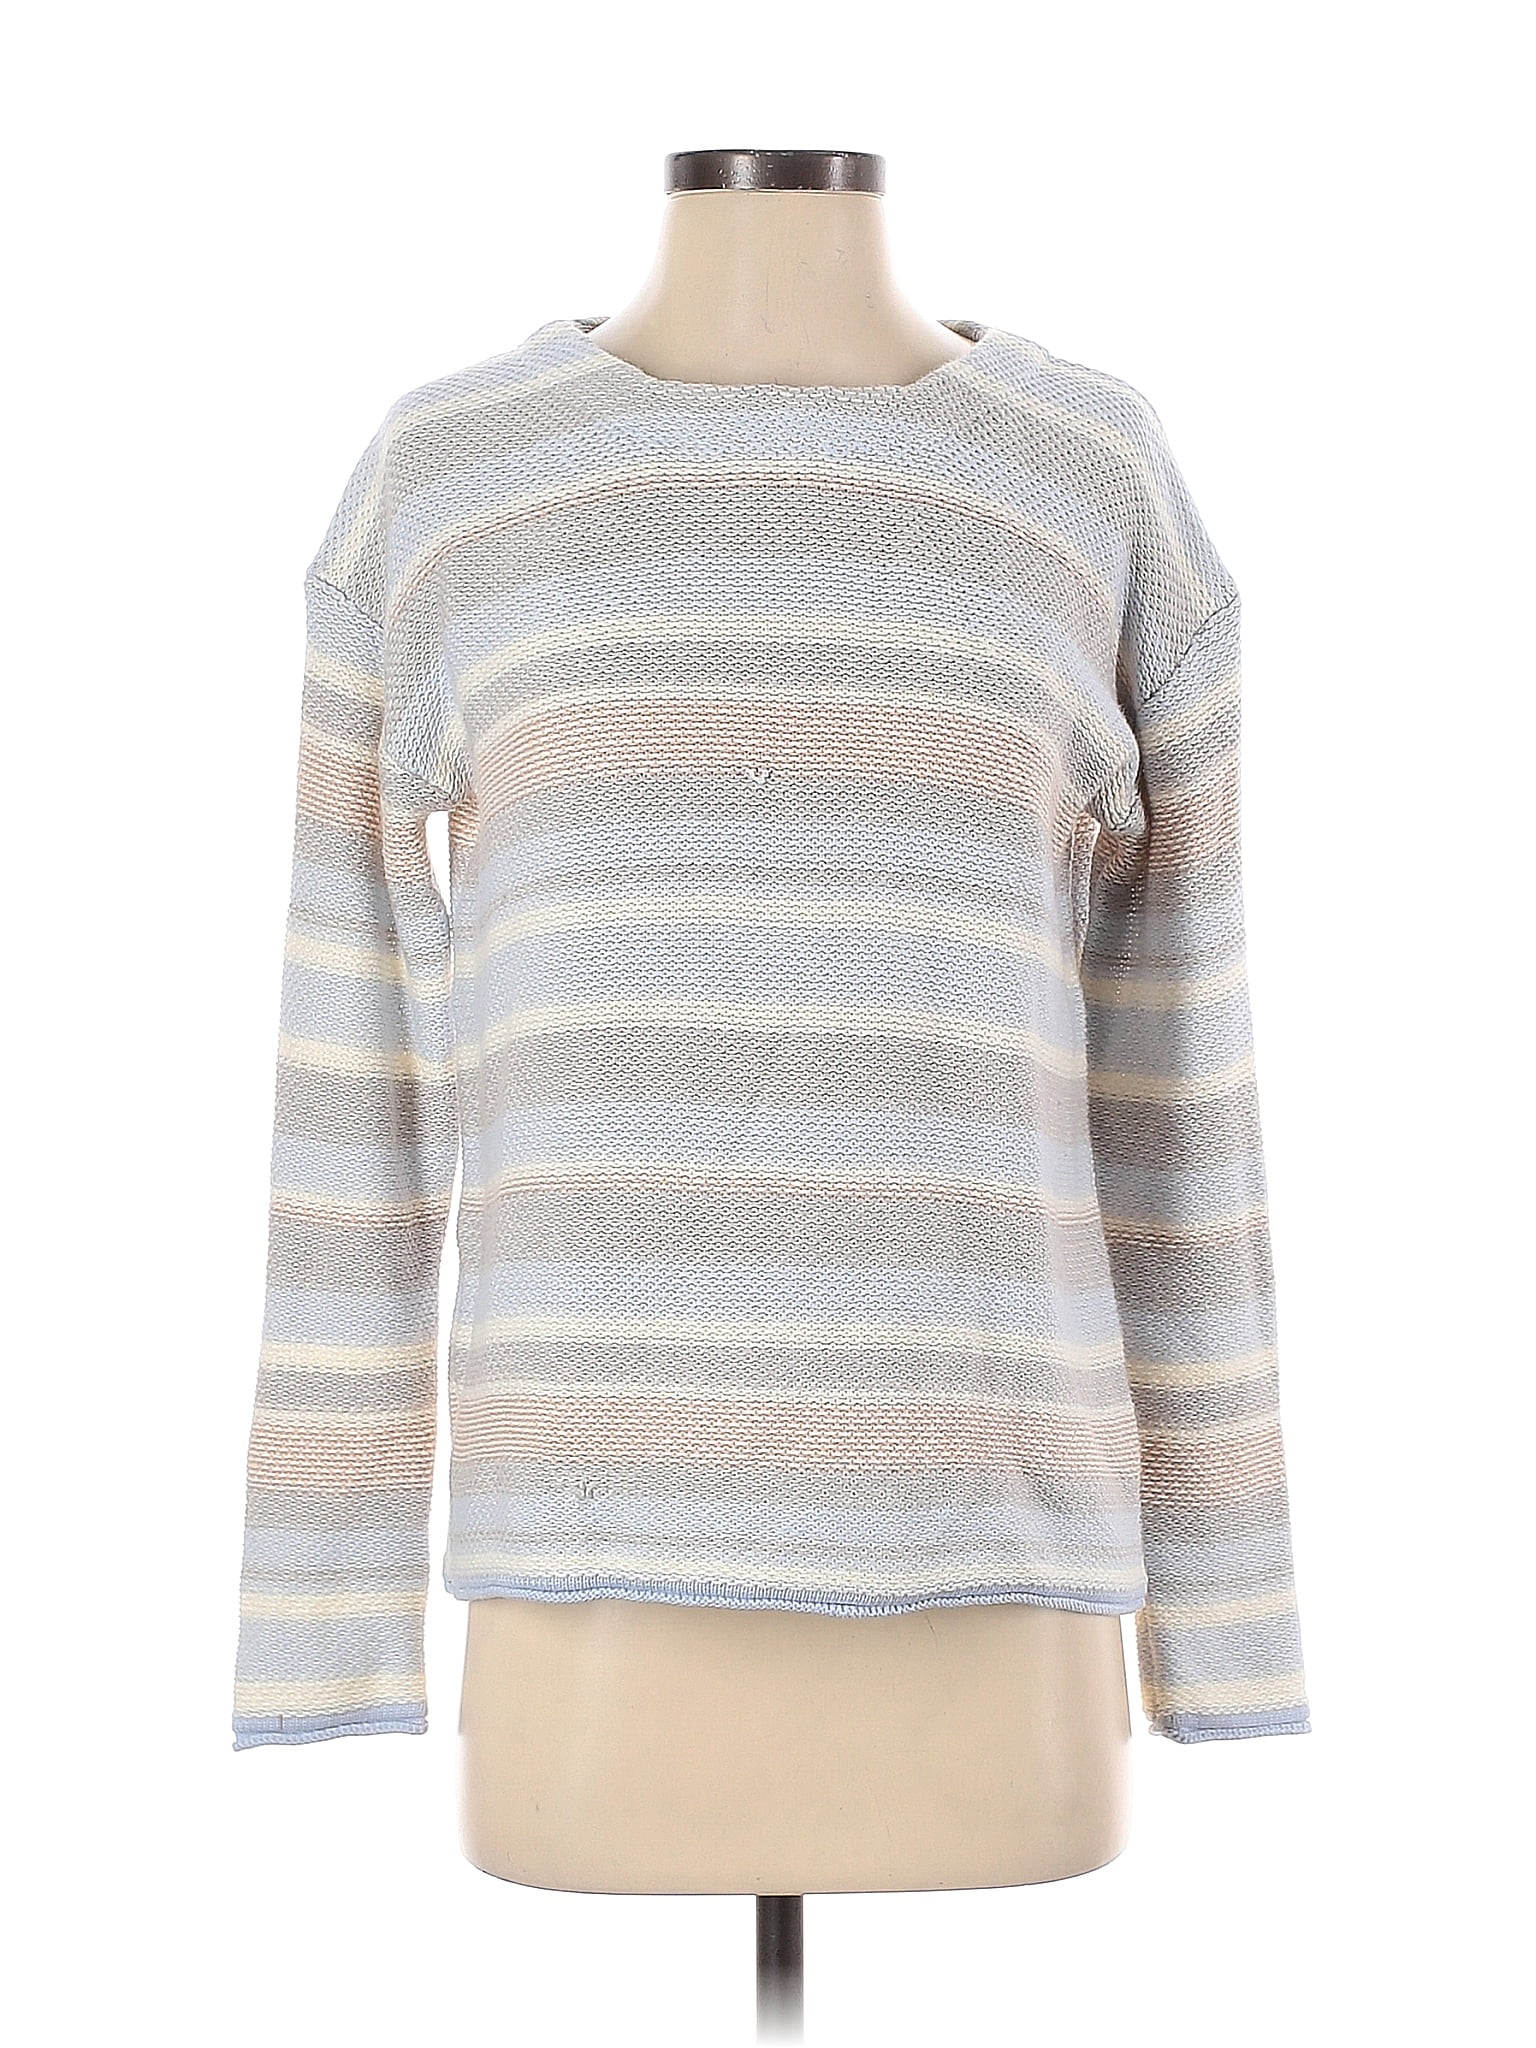 Faherty Color Block Stripes Silver Pullover Sweater Size S - 79% off ...